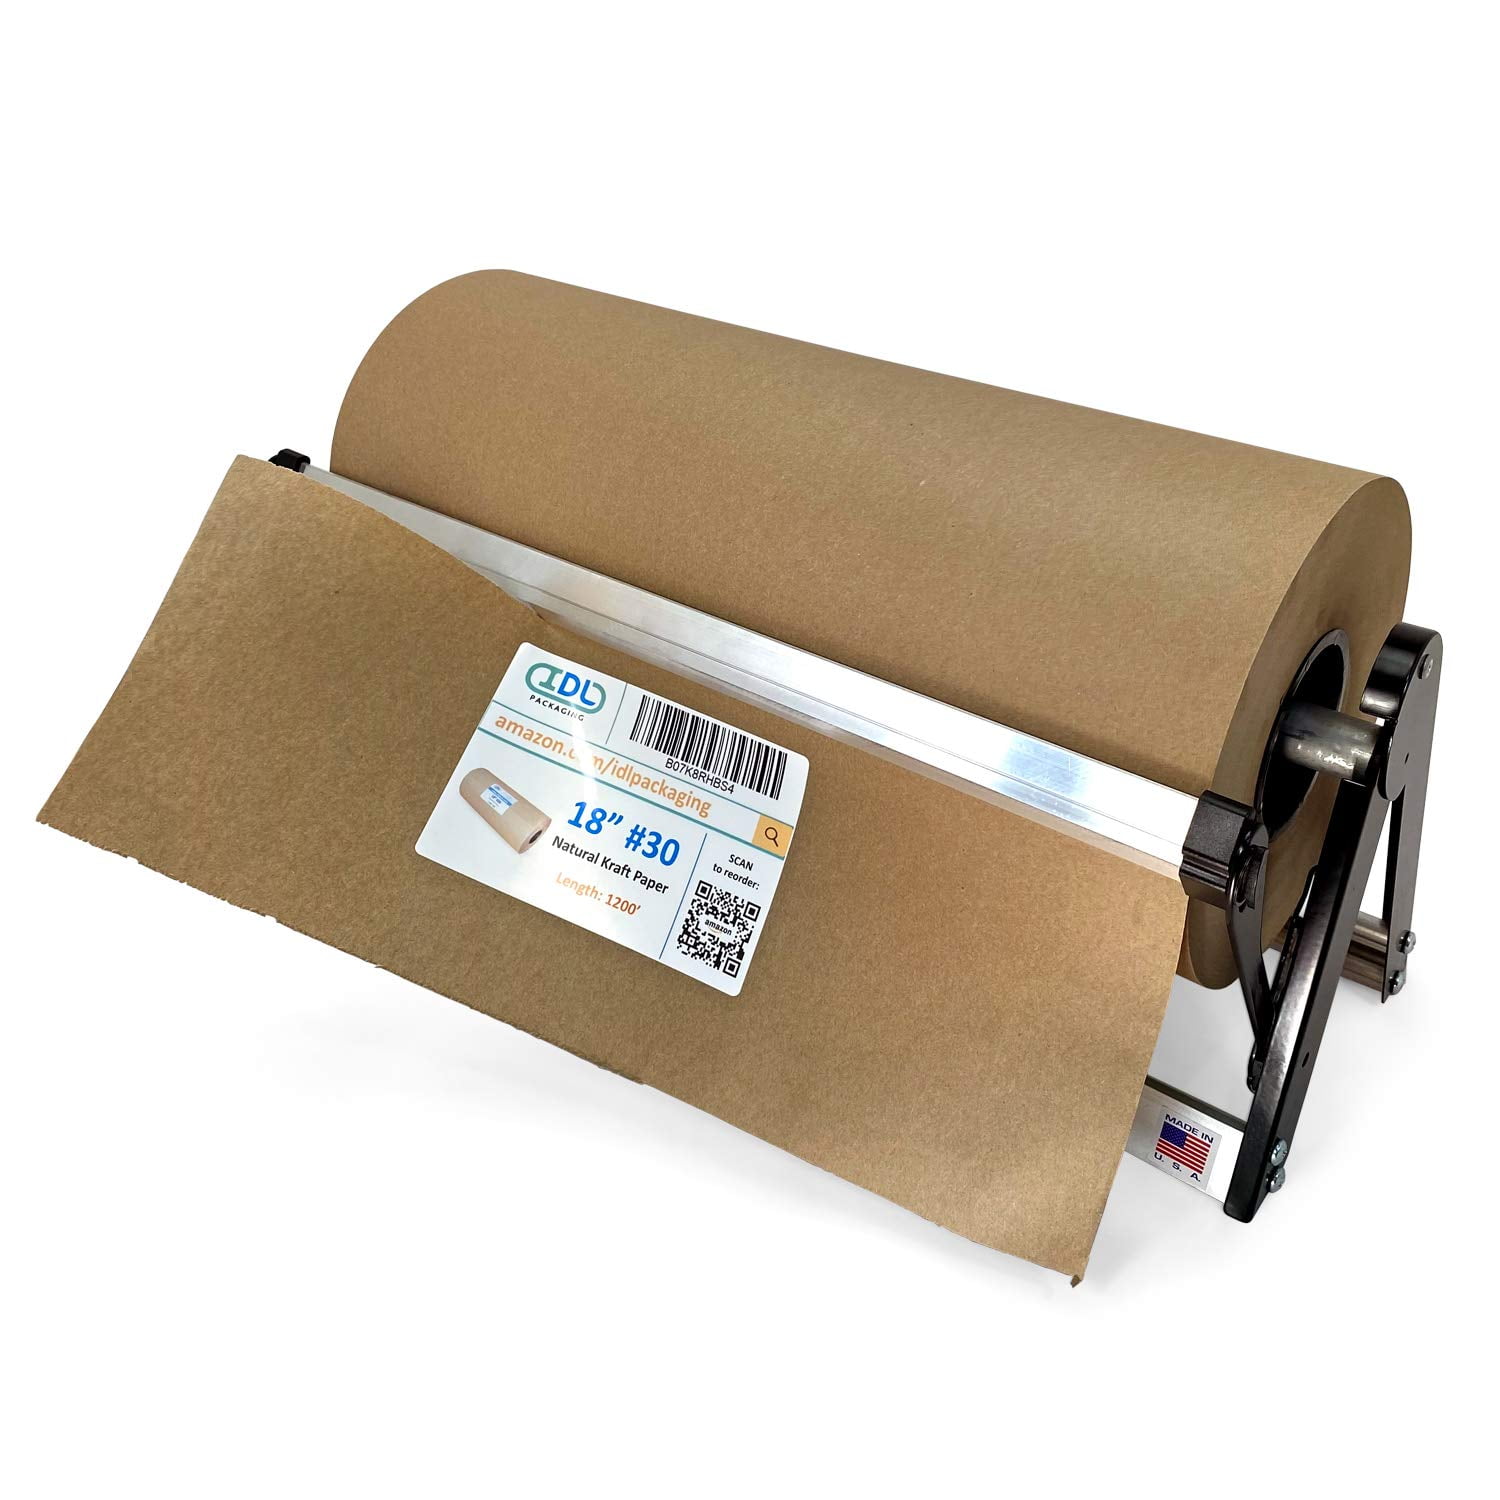 PD 100 Horizontal Paper Cutter for Kraft and Butcher Paper buy in stock in  U.S. in IDL Packaging